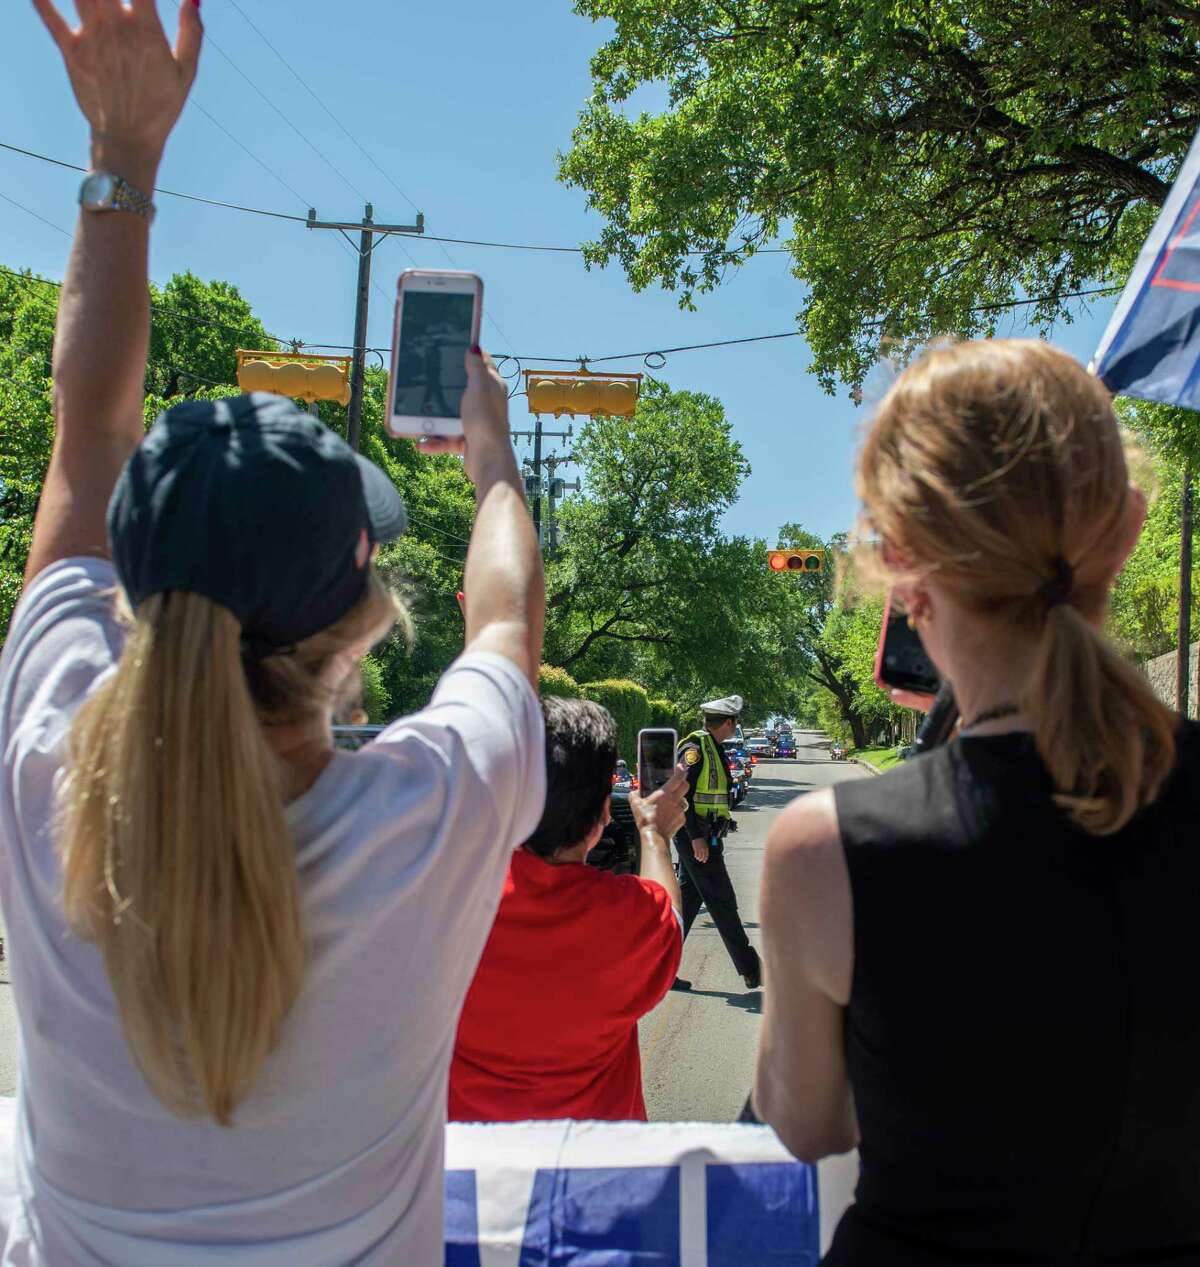 Trump supporters wave at President Donald Tump's motorcade on route to a fundraiser at Alamo Heights on Wednesday, April 10, 2019.